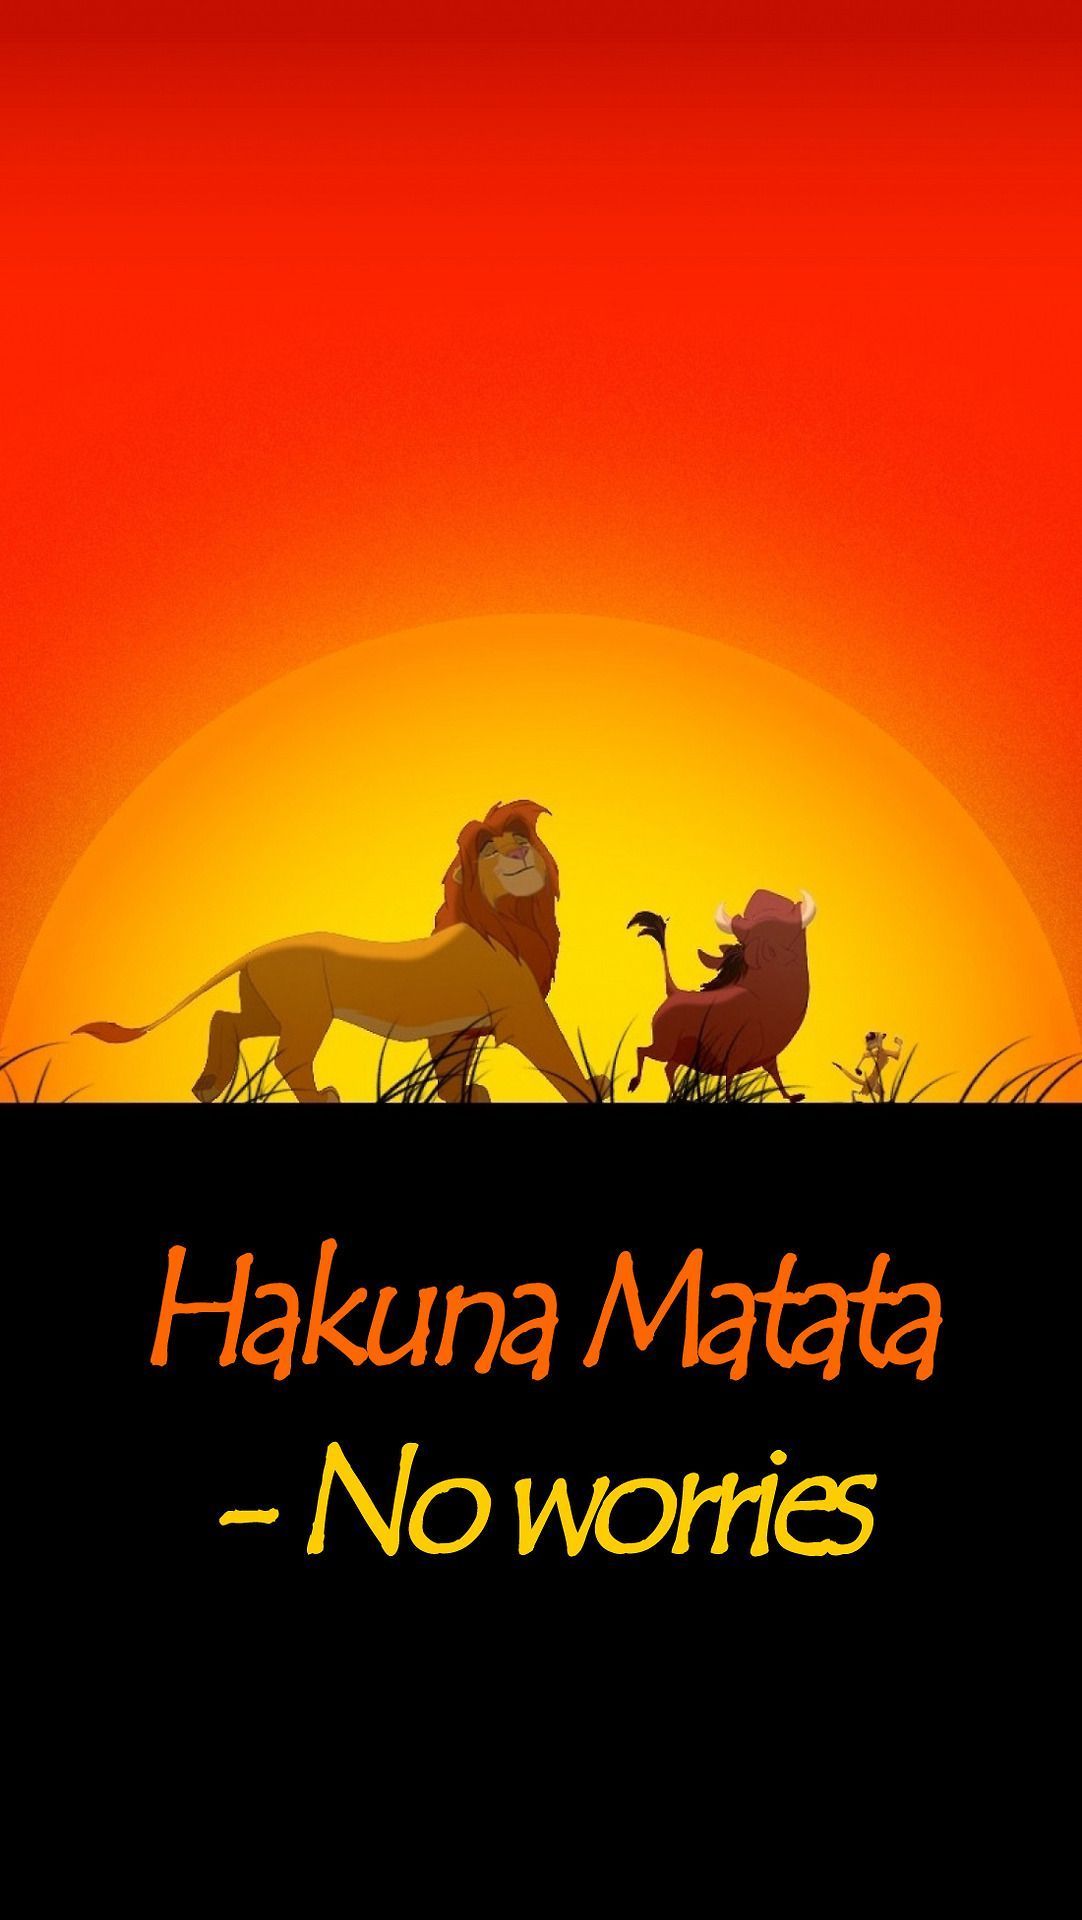 Lion King Quotes Wallpaper Free Lion King Quotes Background